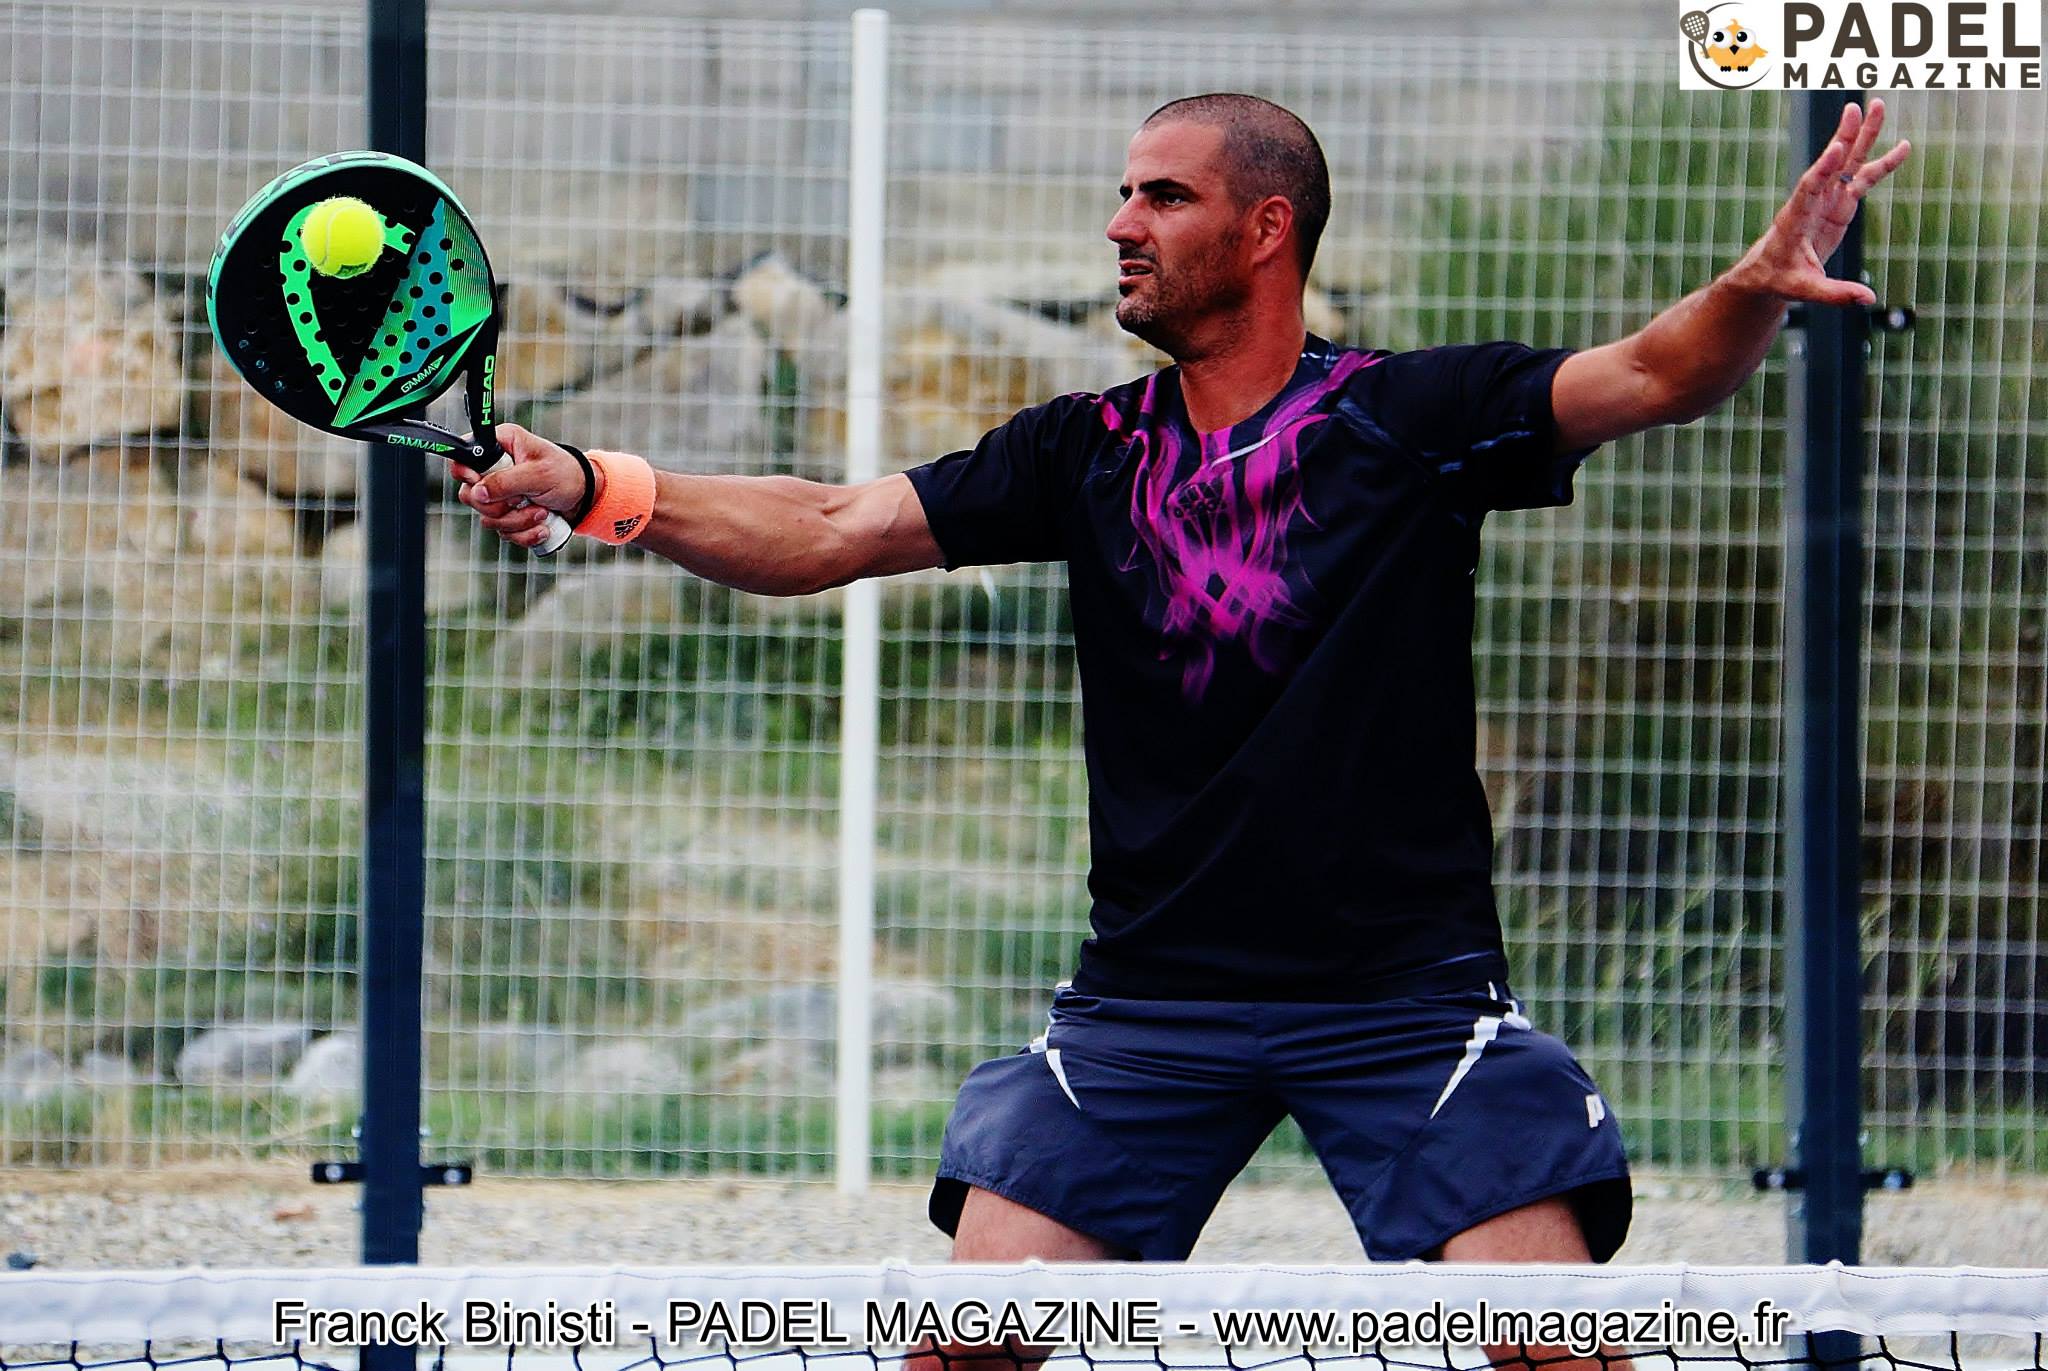 Languedoc: “A land of padel »